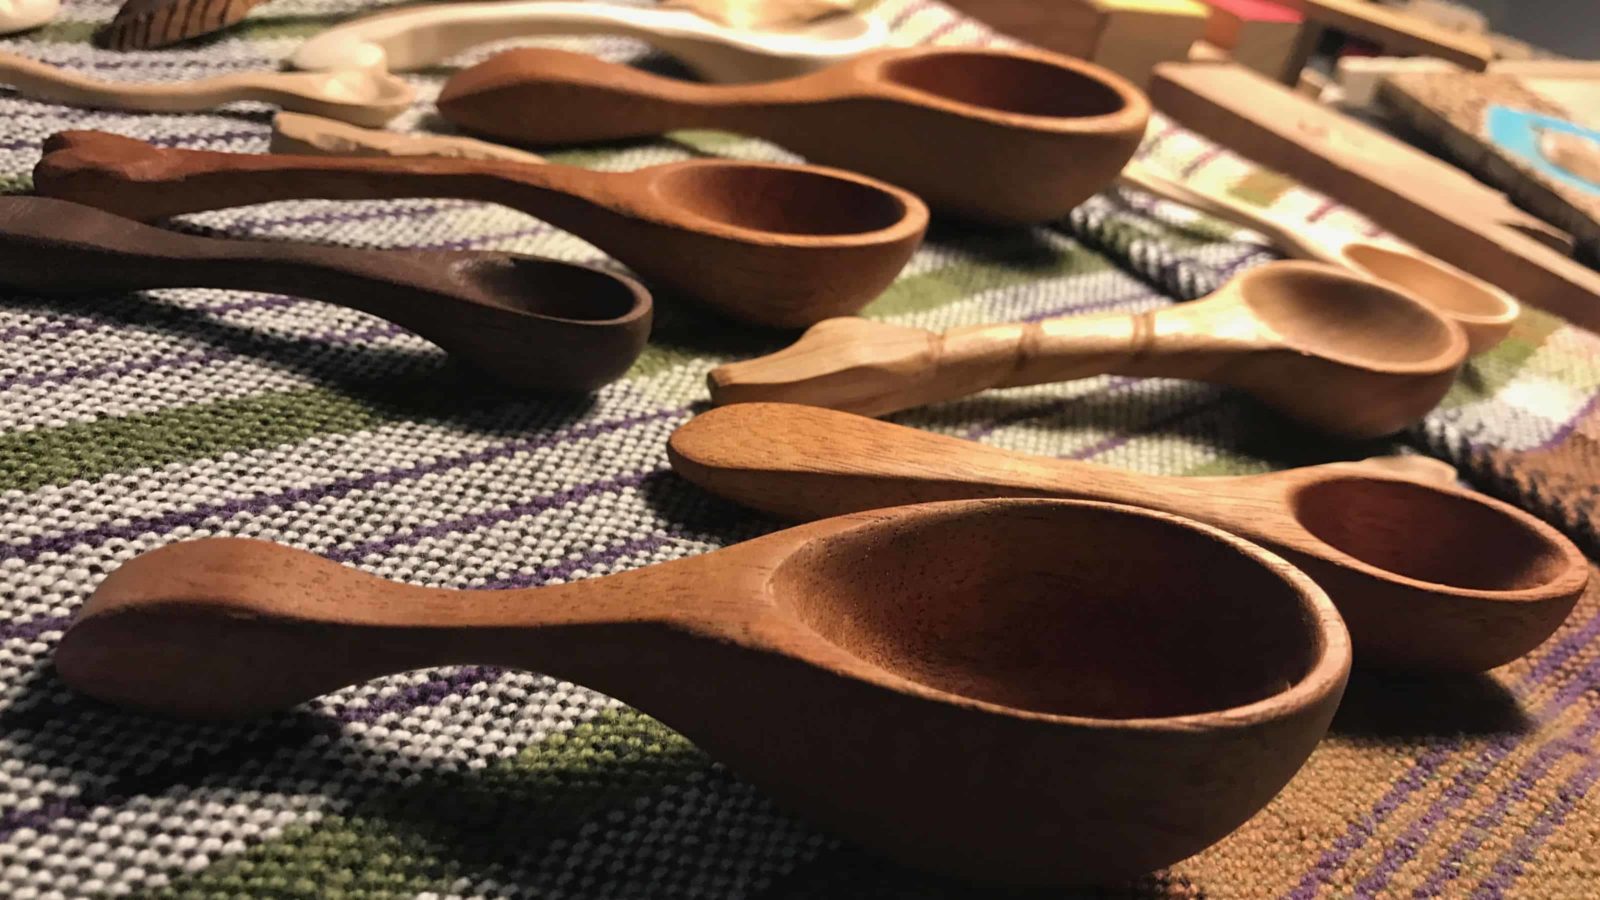 Tony Pisano, an artist and woodworker, beekeeper, musician and more in North Adams, carves spoons in a workshop at he has set up at Mass MoCA as part of an exhibit in 2018.